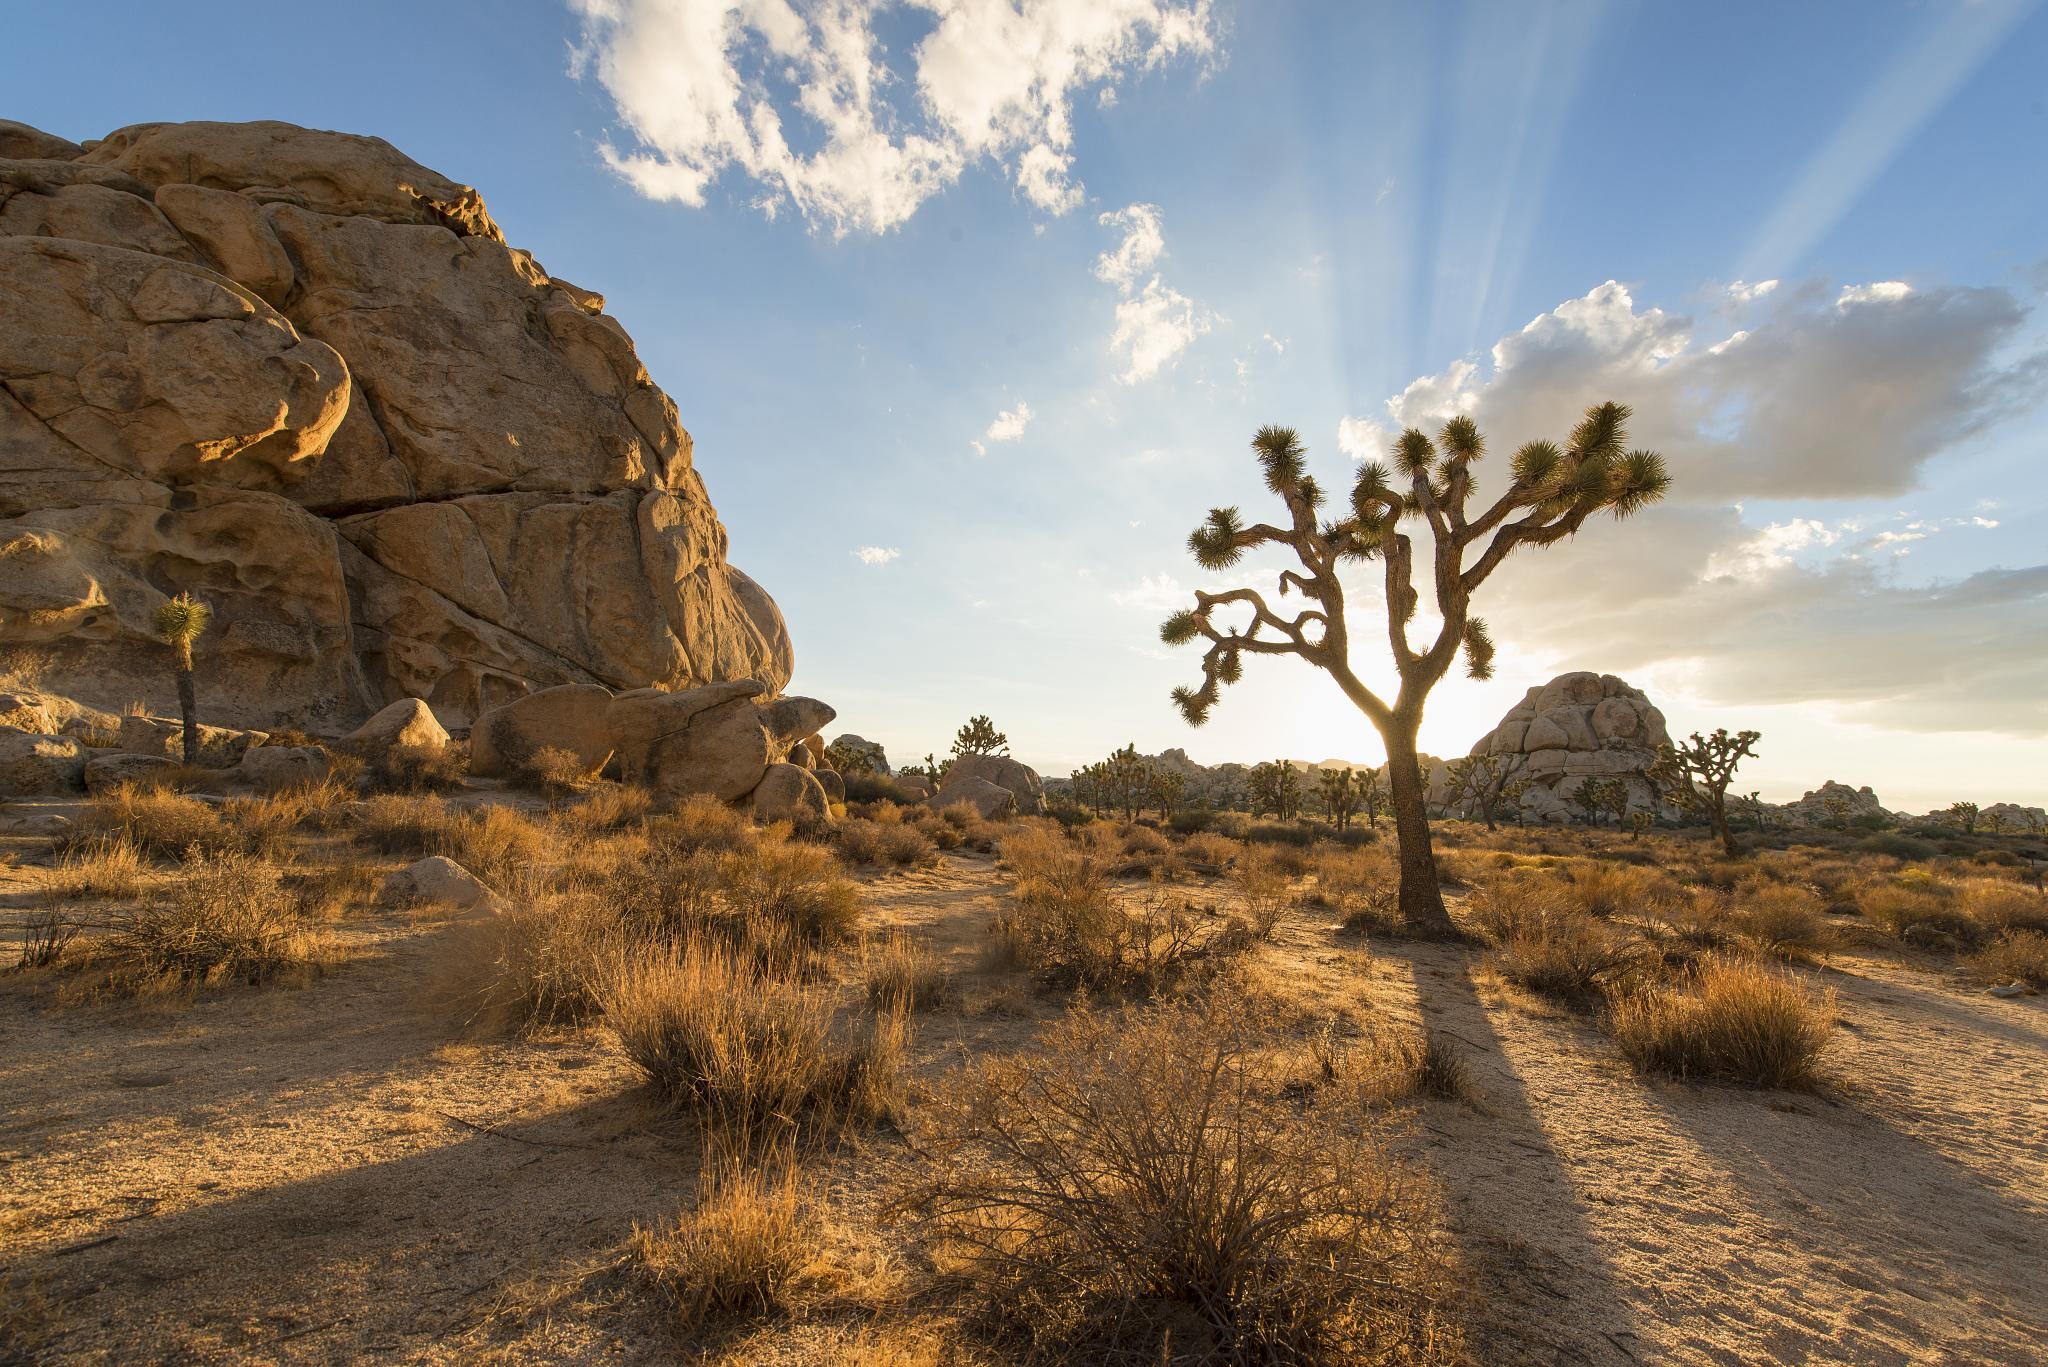 A joshua tree and a rock outcropping